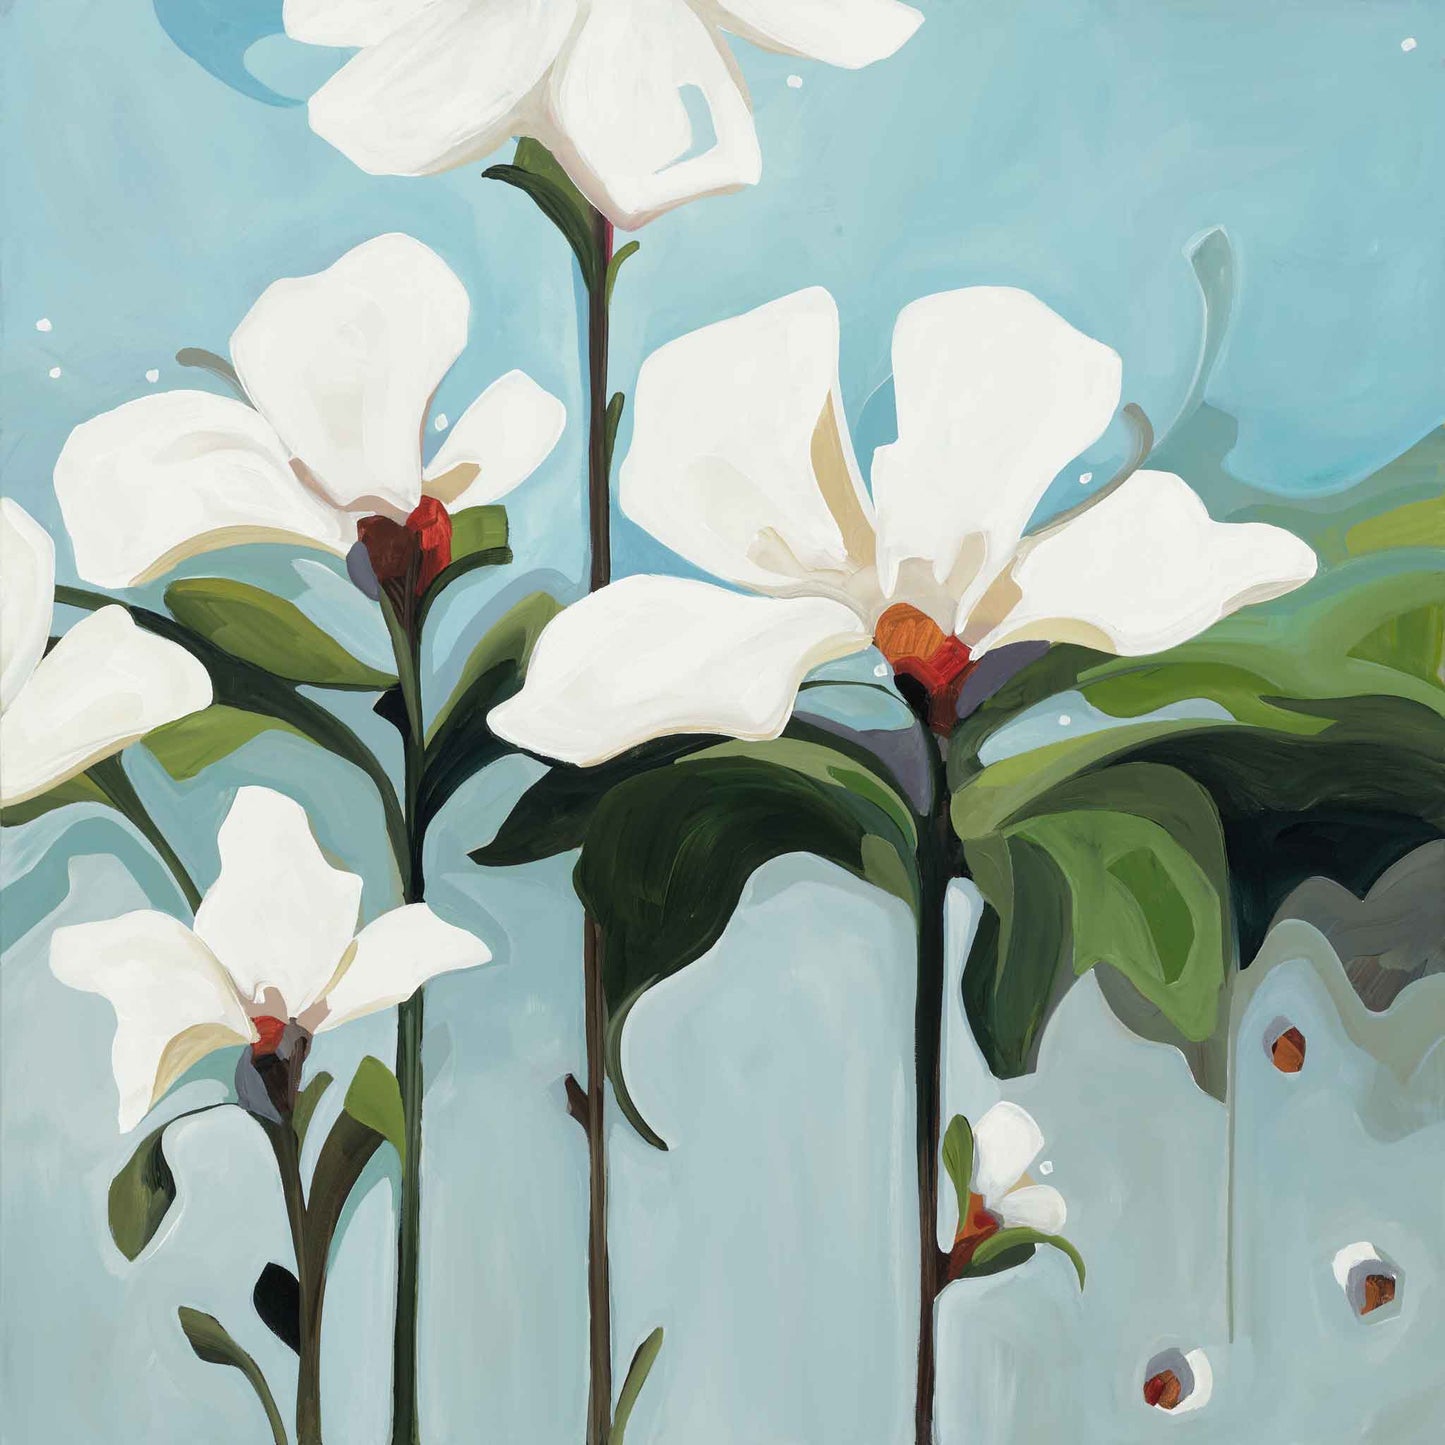 acrylic flower painting with big white flowers on grey blue background by Canadian artist Susannah Bleasby